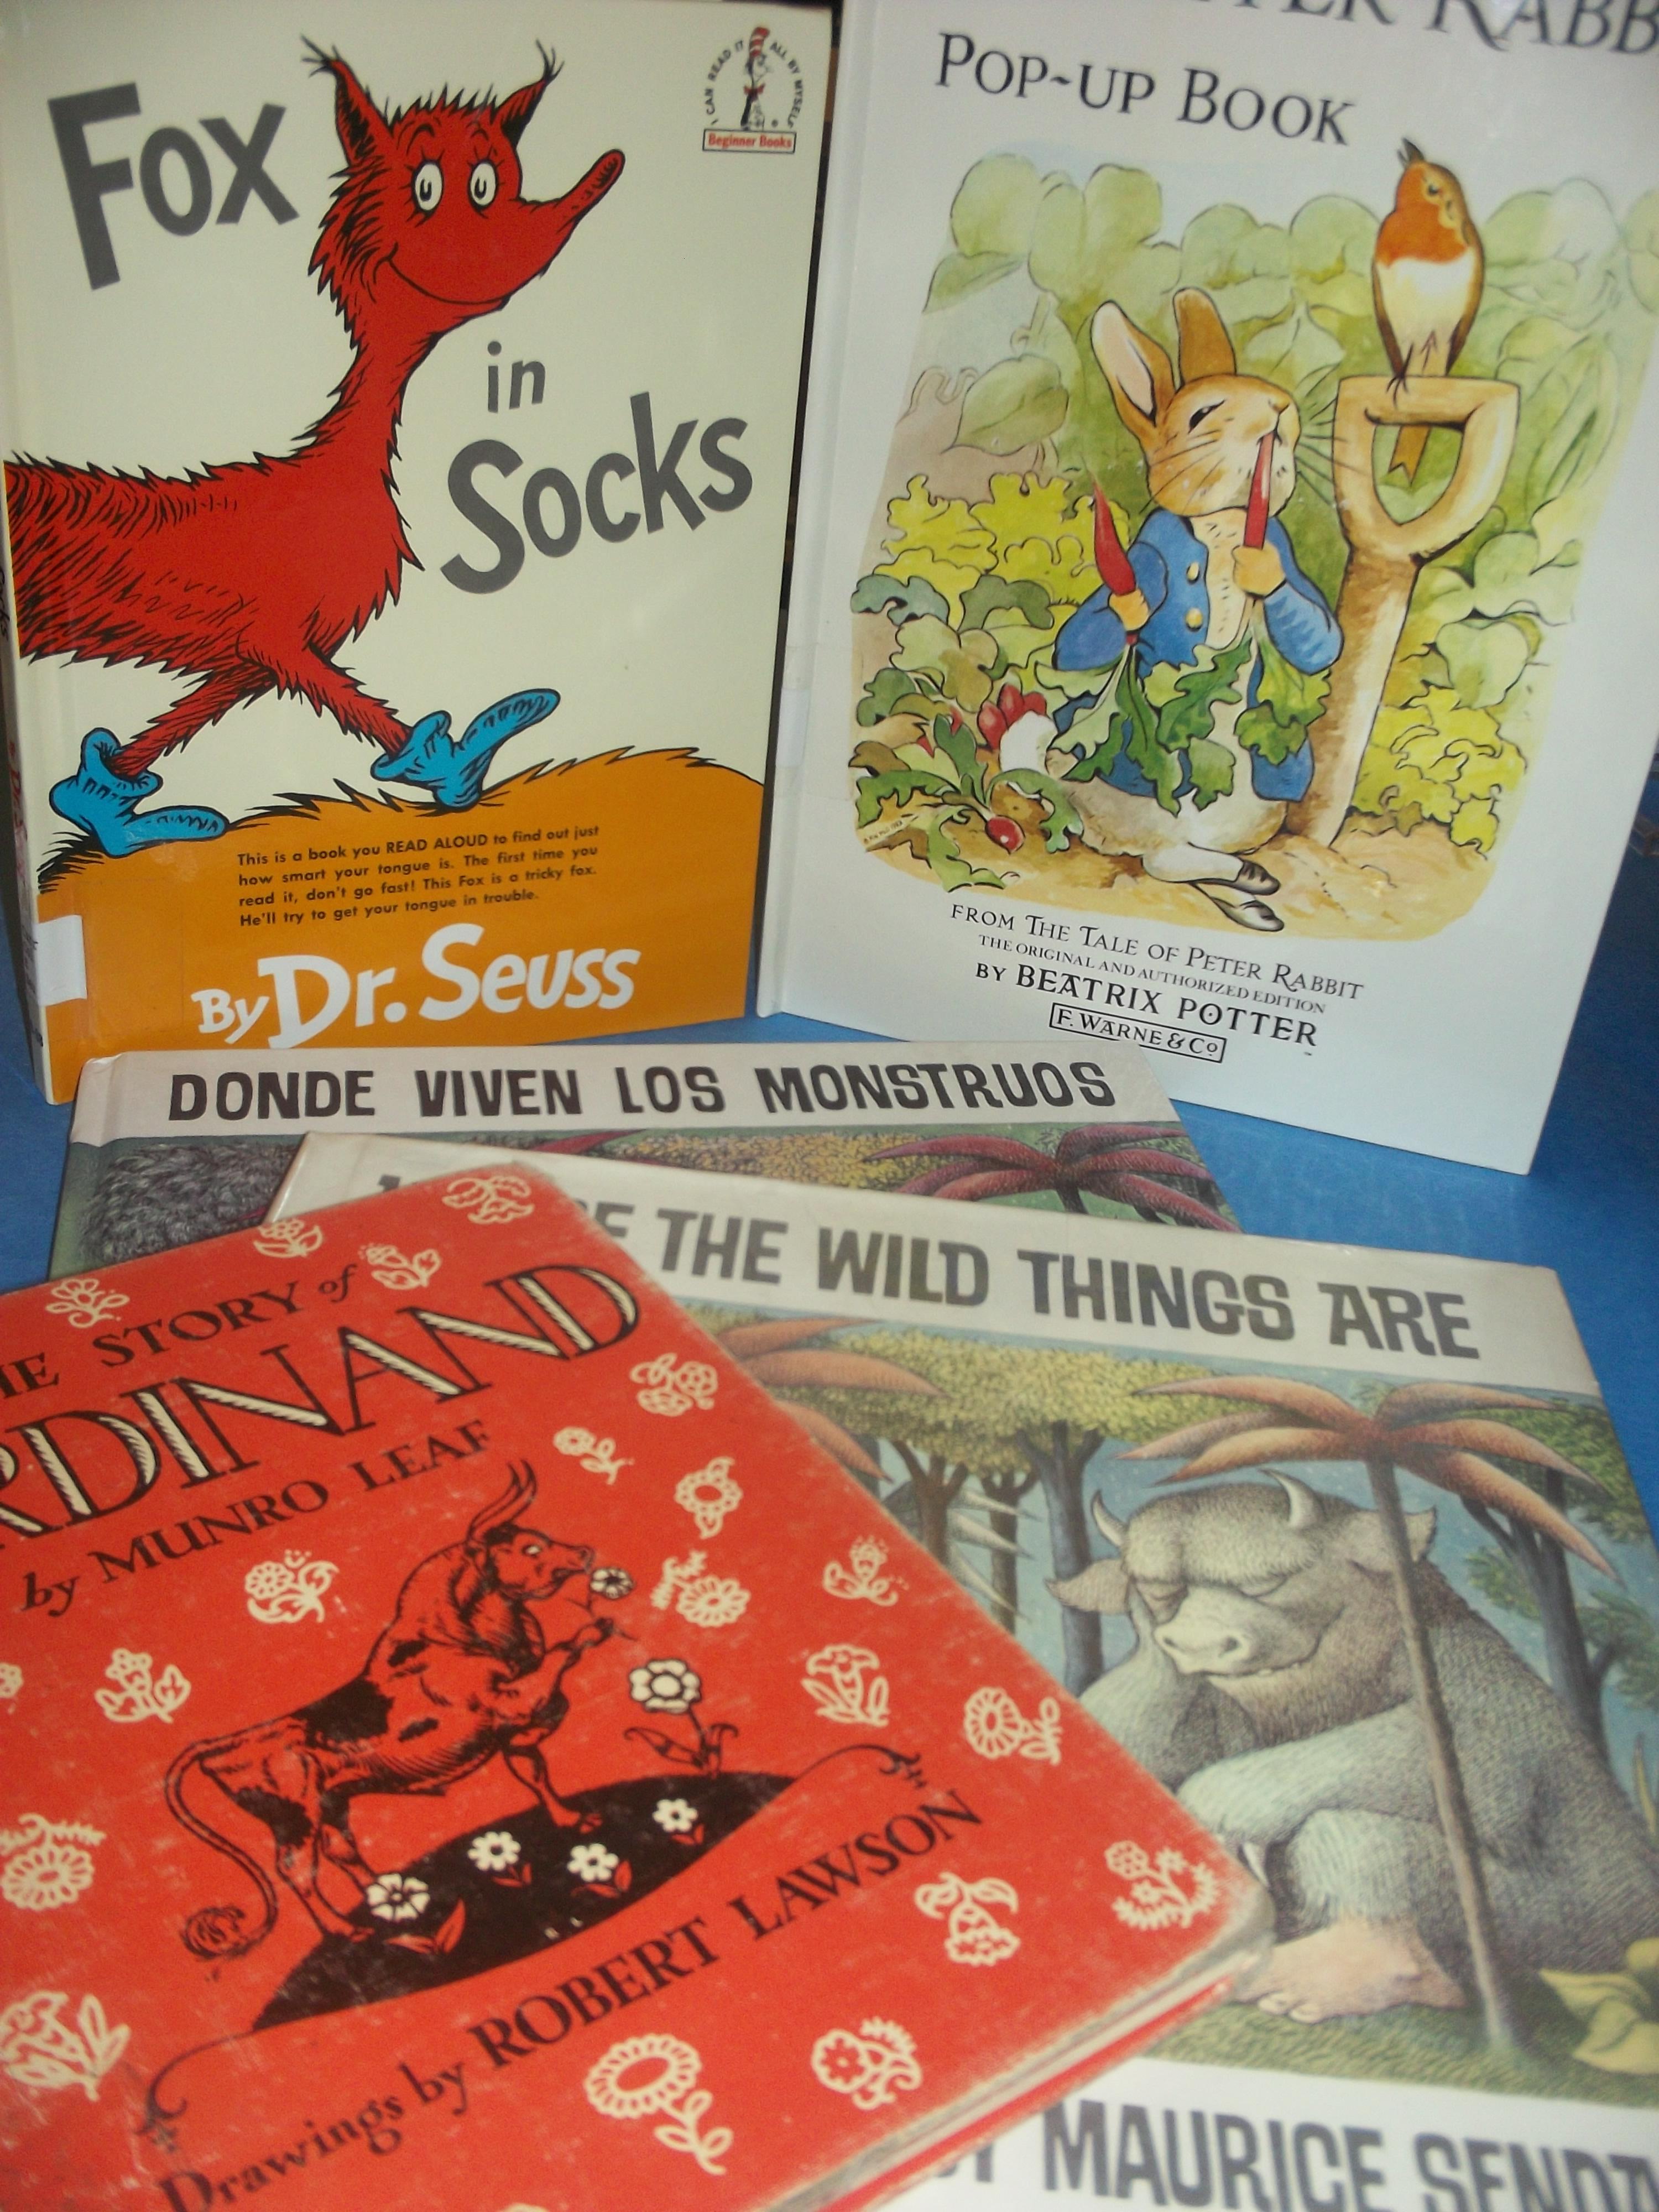 Favorite books from the Children's Collection